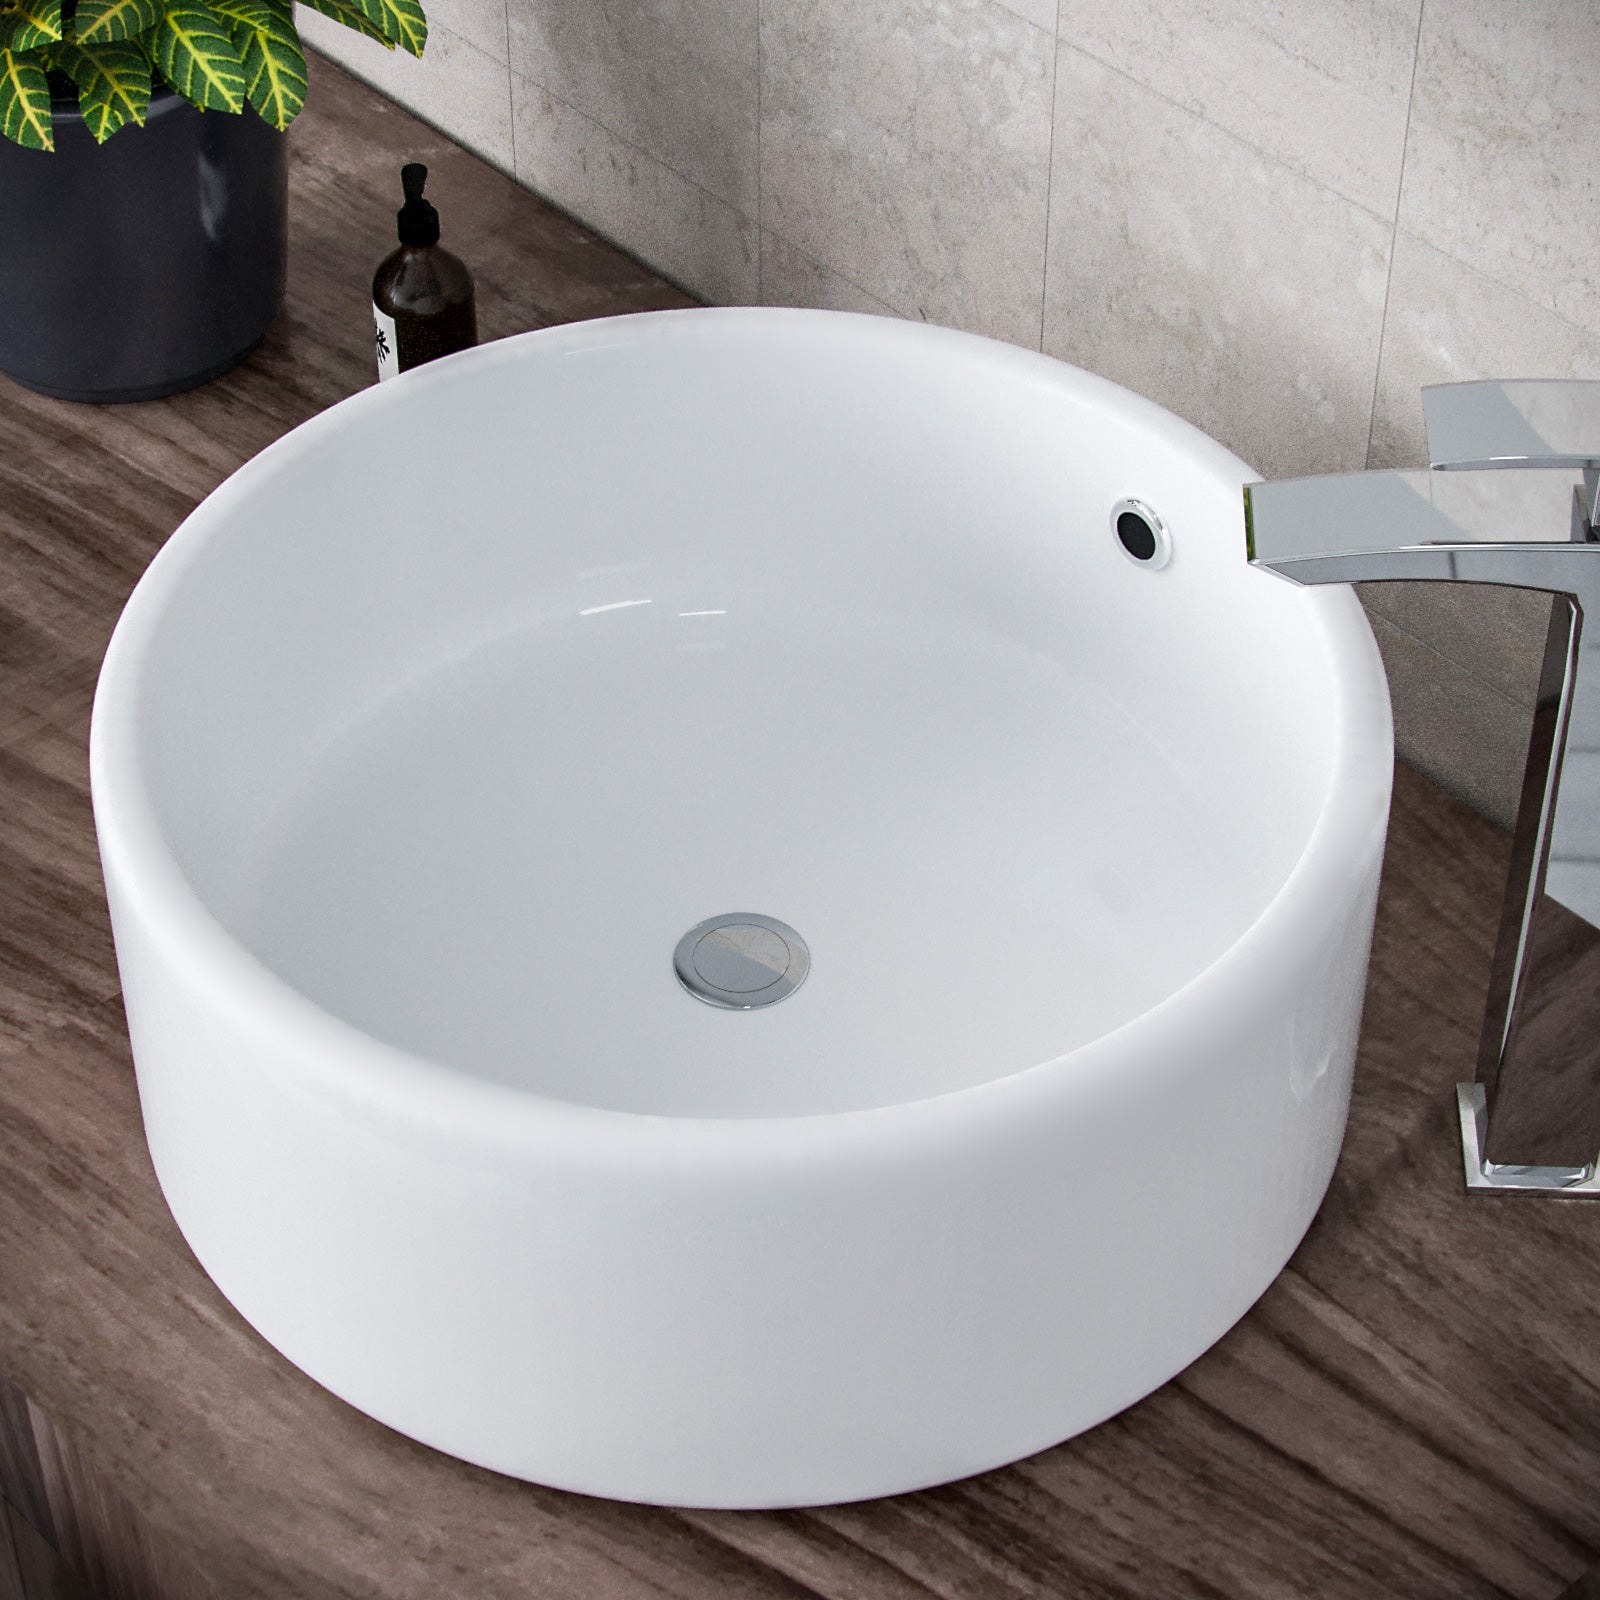 Etive 420mm Cloakroom Stand Alone Round Counter Top Basin Sink Bowl